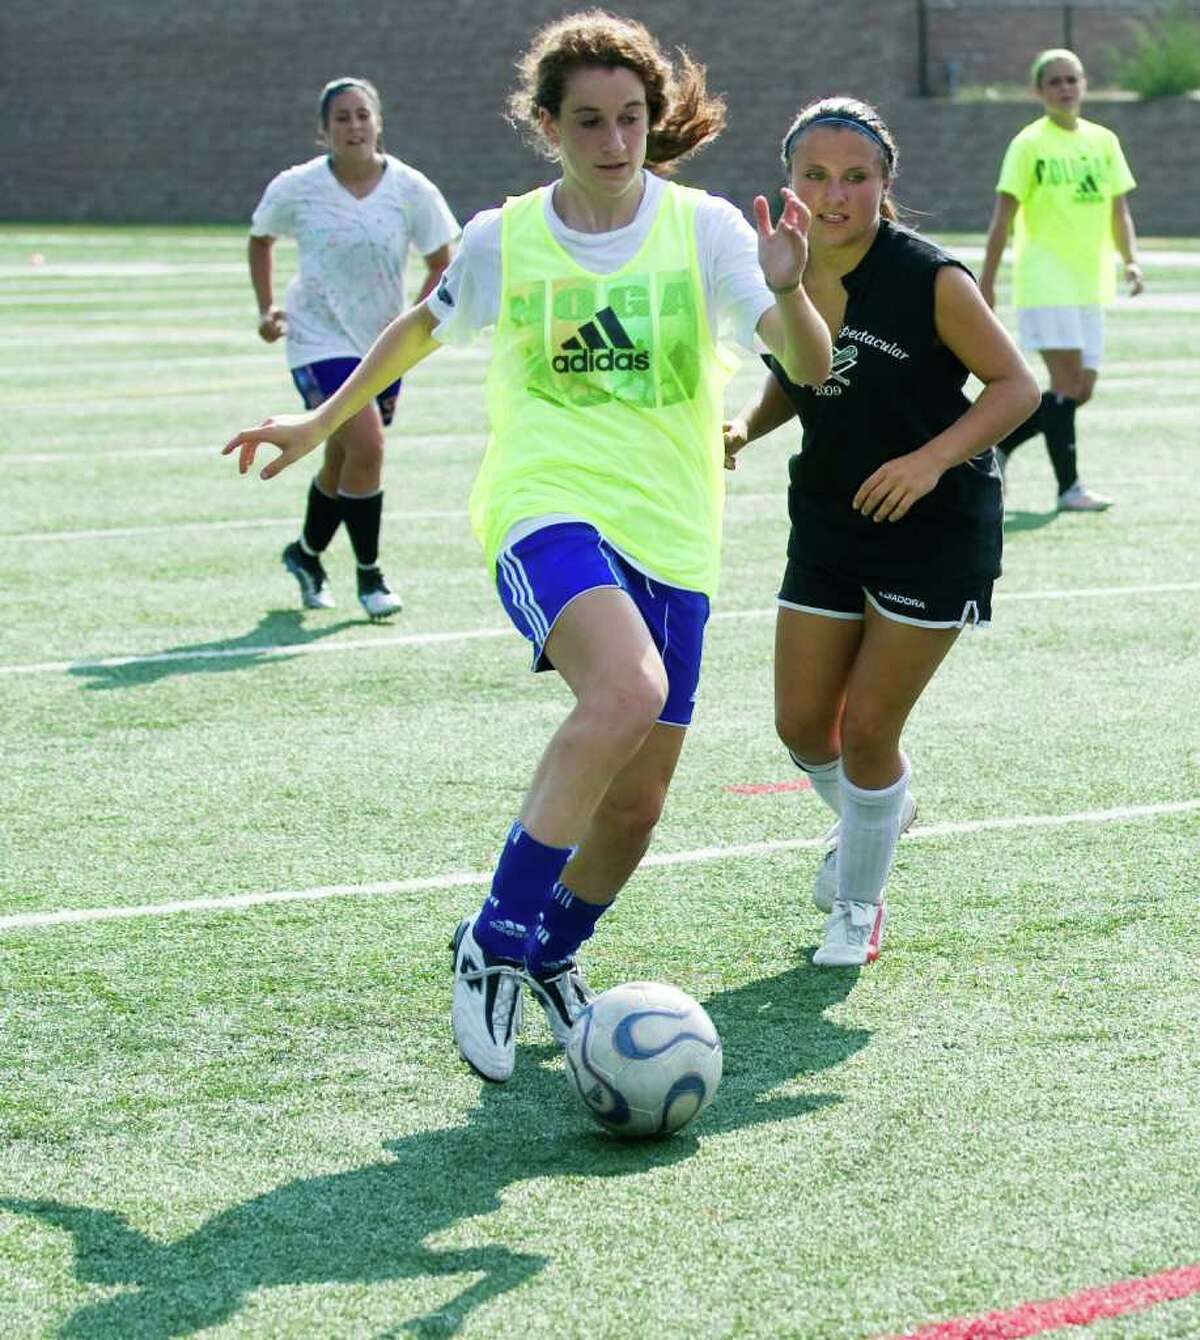 Julia Busto in action as the Westhill High School girls soccer team practices at the school in Stamford, Conn., September 12, 2011.